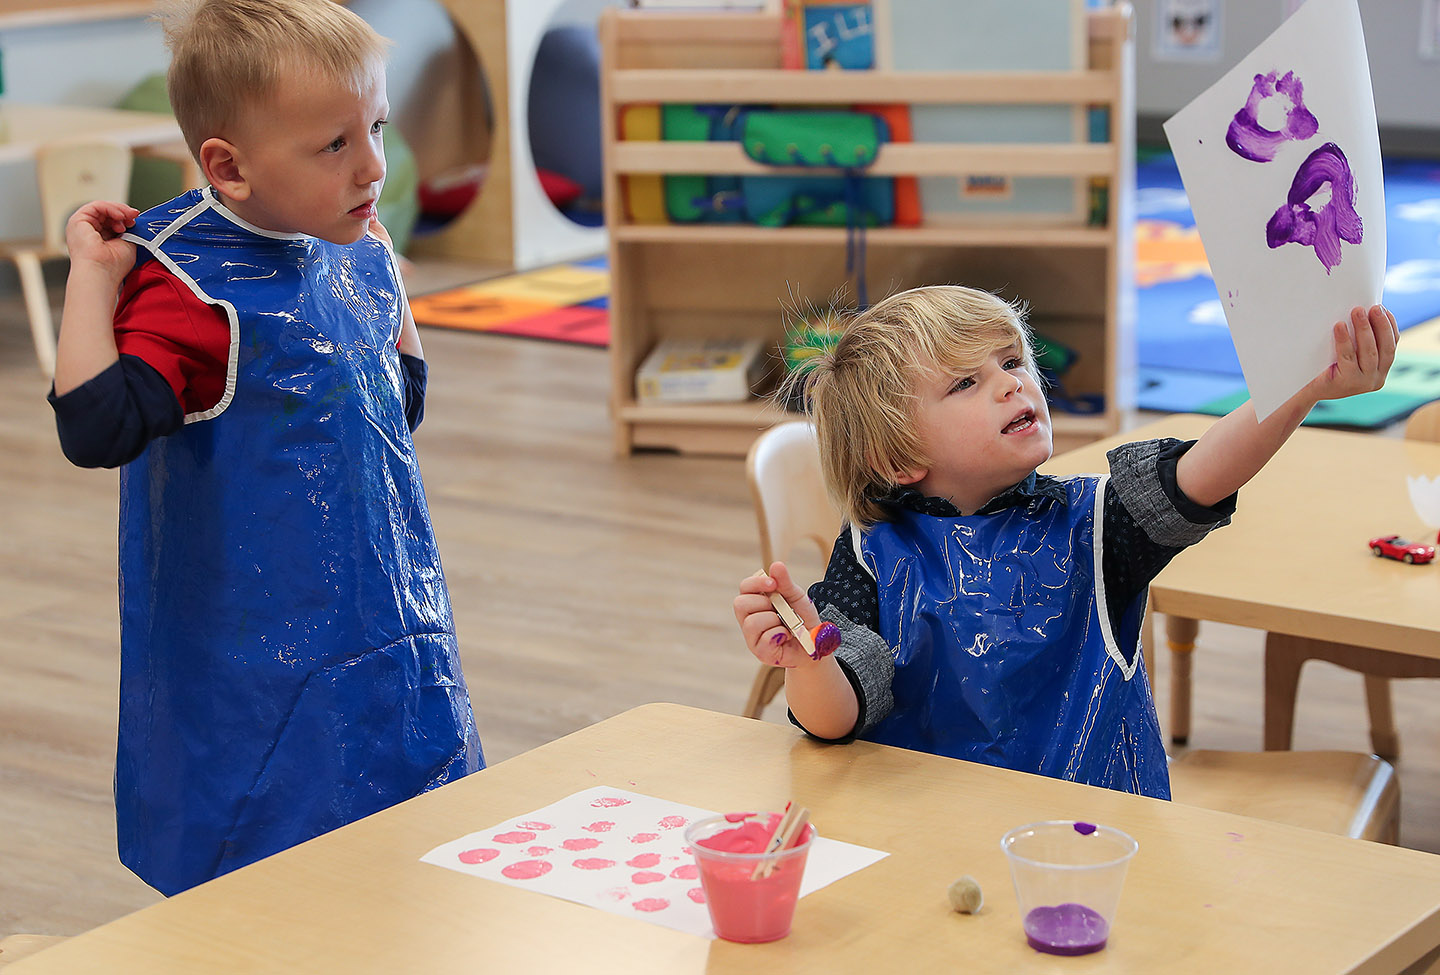 UNK’s Plambeck Early Childhood Education Center provides developmentally appropriate education for children from infant to age 6. It serves UNK students and employees, as well as the Kearney-area community.